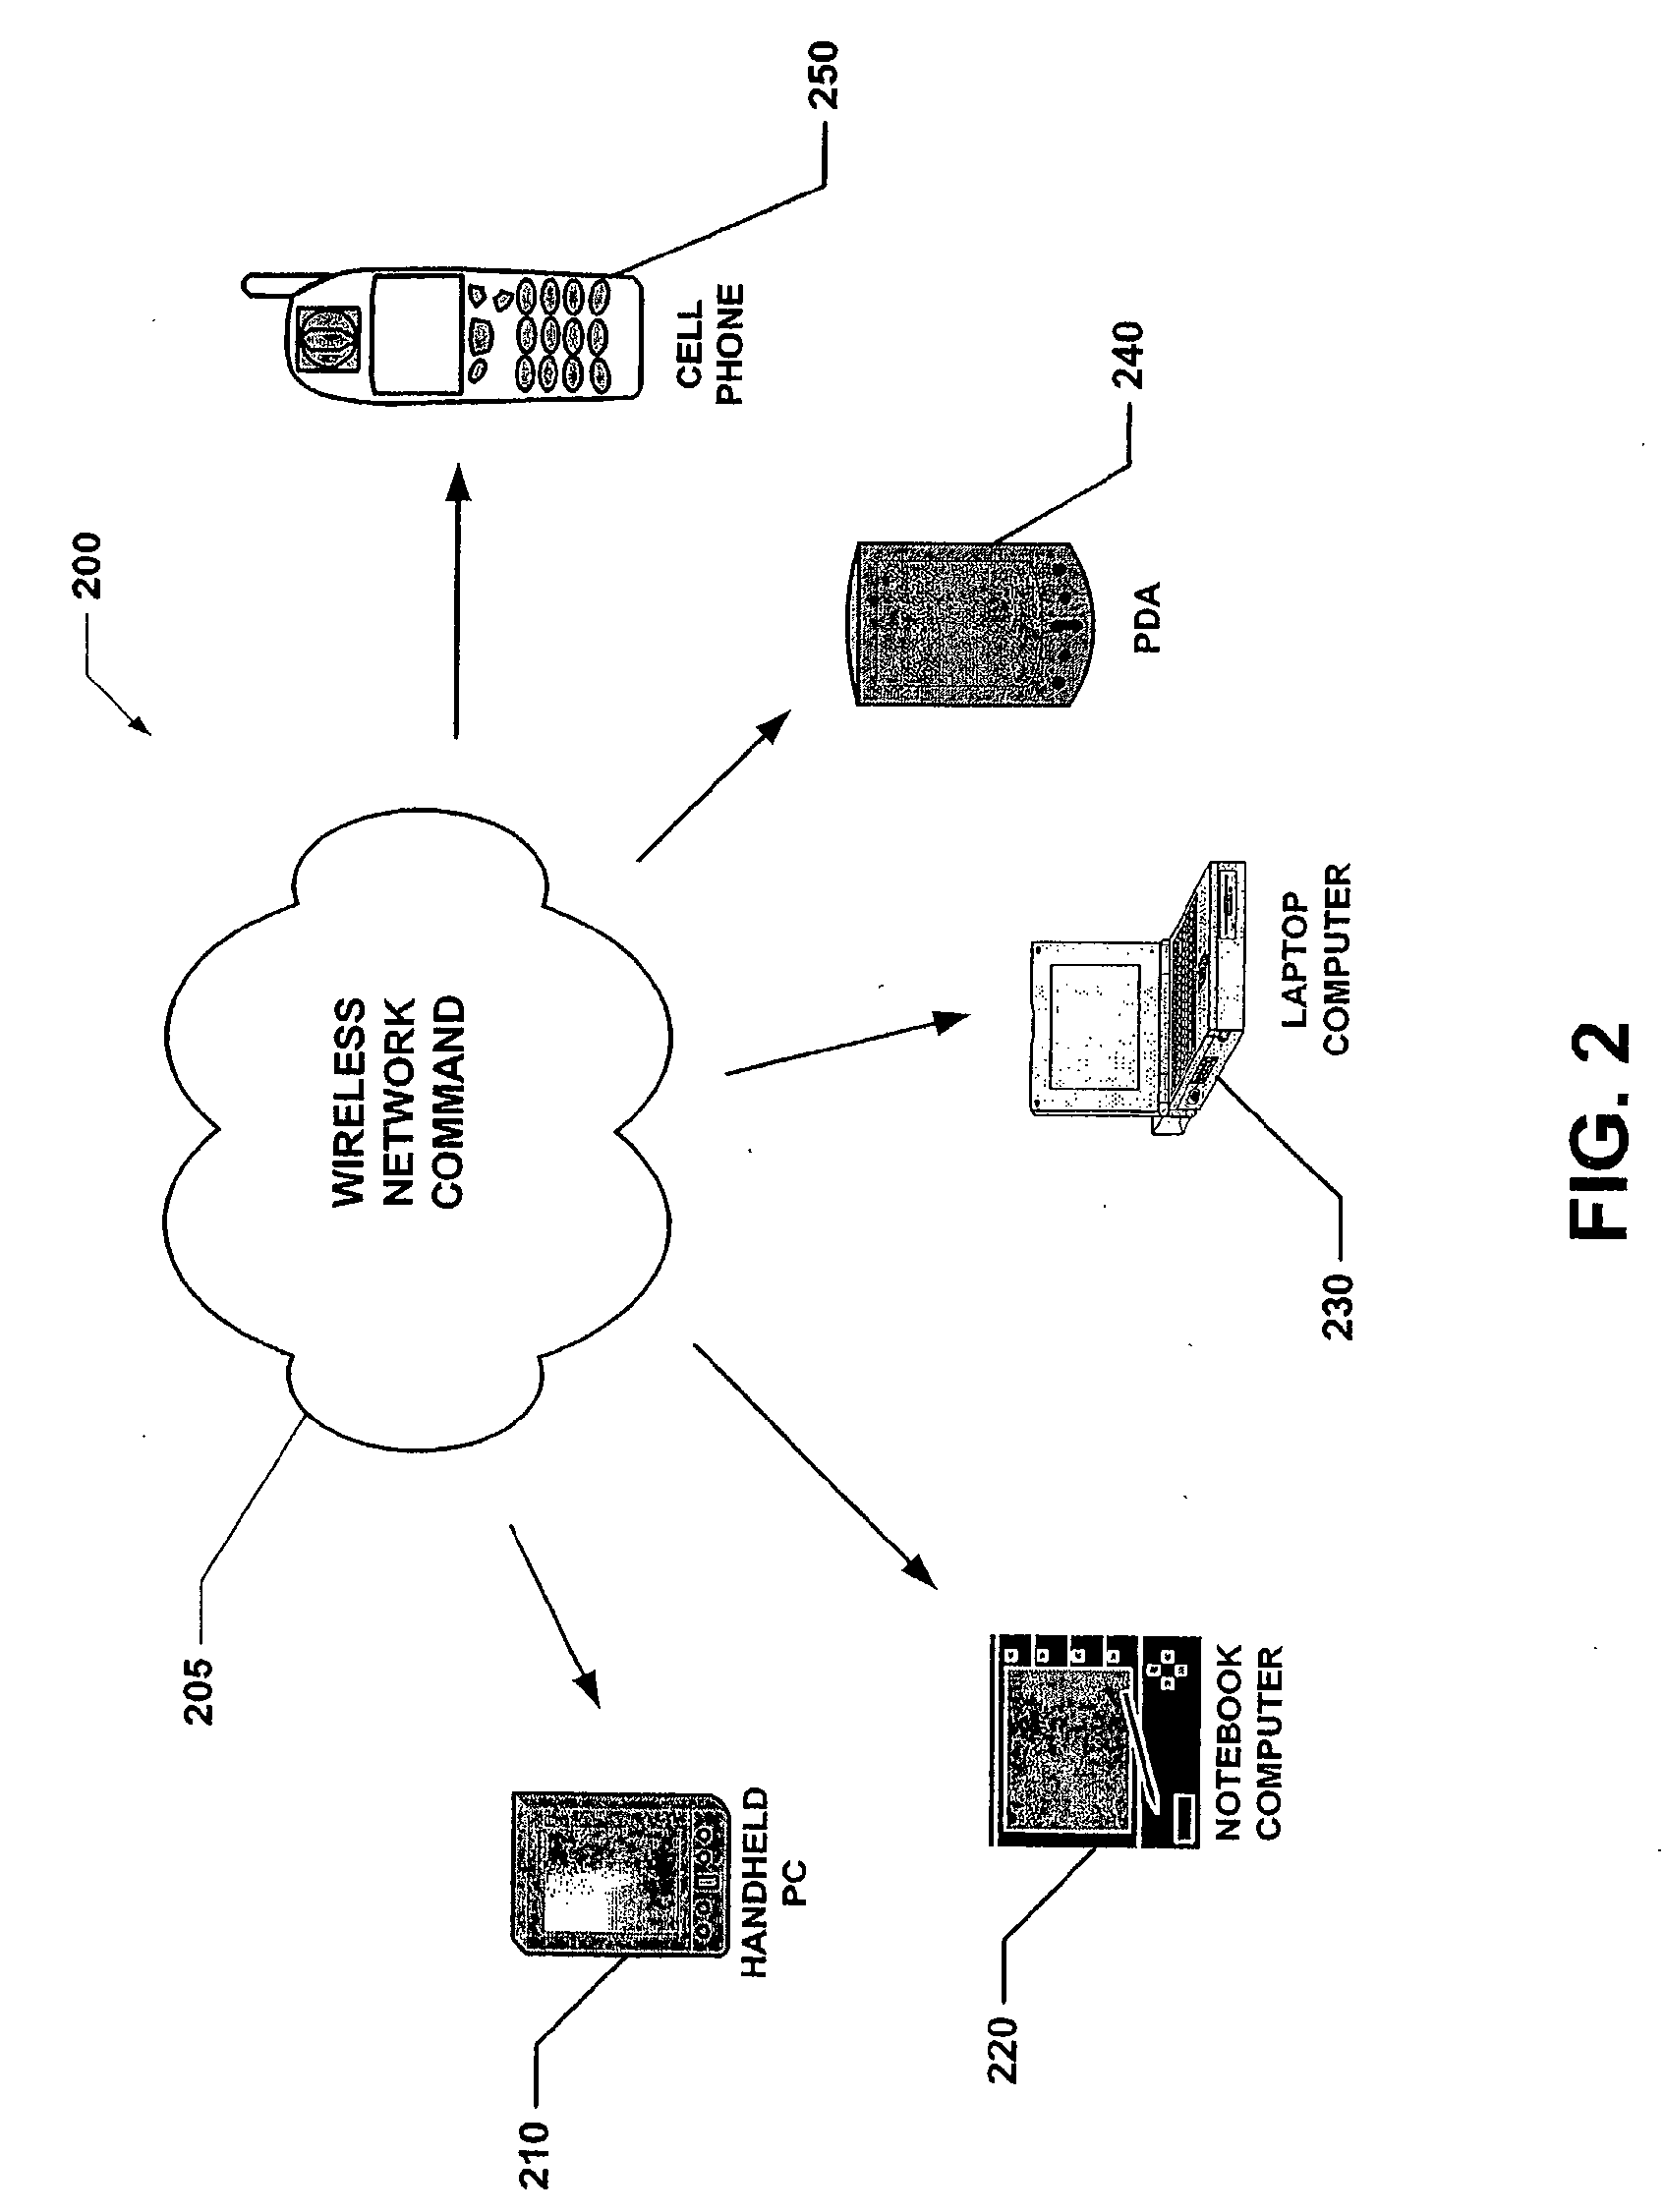 System and Method for Limiting Mobile Device Functionality.